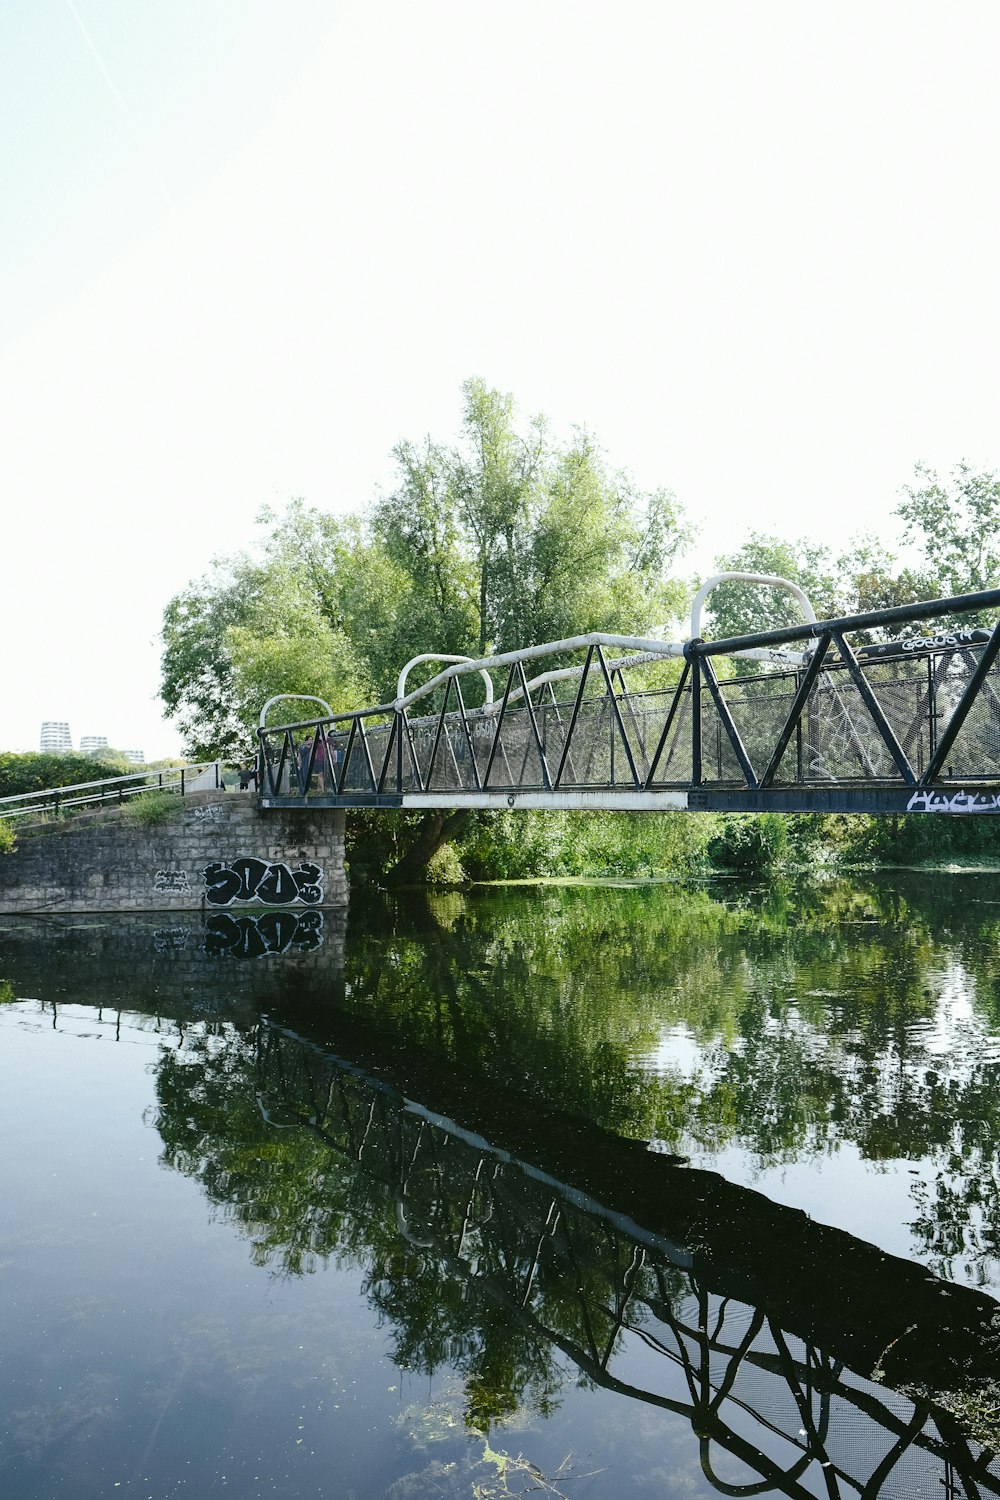 a bridge over a body of water with trees in the background